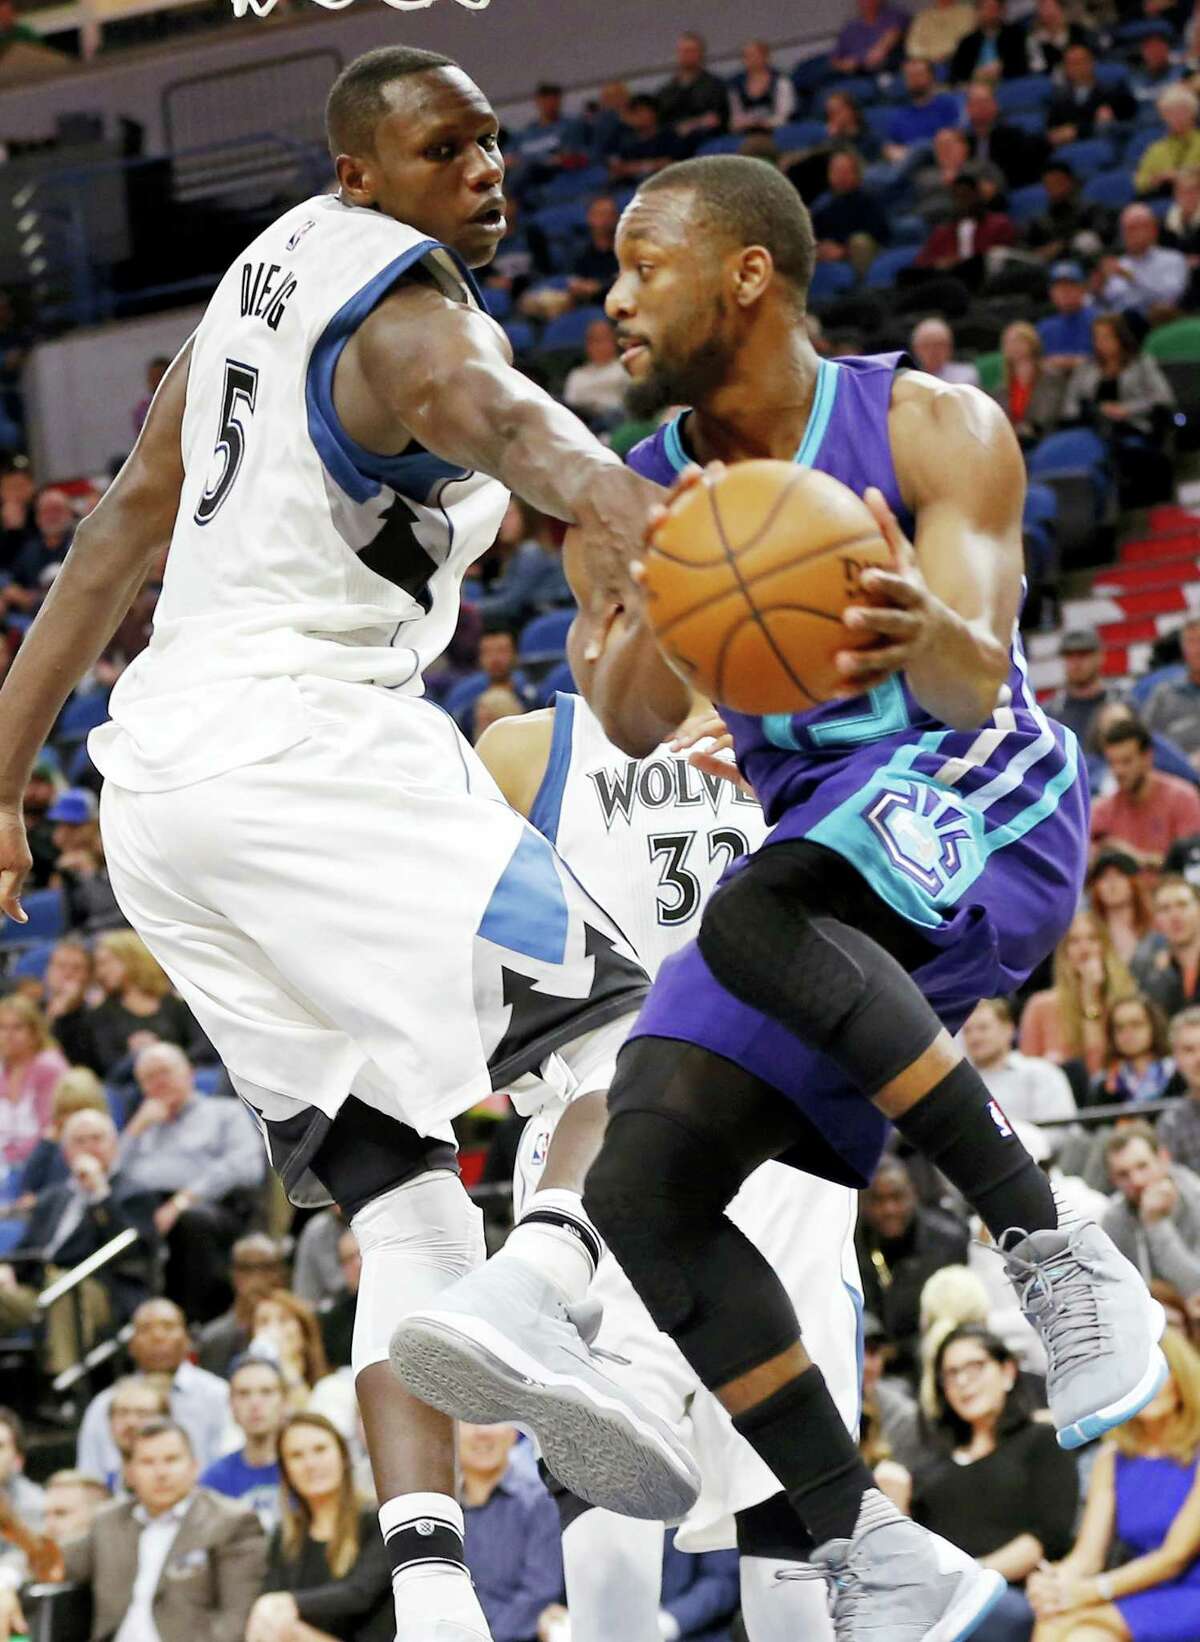 Charlotte Hornets’ Kemba Walker, right, goes airborne around Minnesota Timberwolves’ Gorgui Dieng of Senegal in the second half of an NBA basketball game Tuesday, Nov. 15, 2016 in Minneapolis. The Hornets won 115-108. Walker led the Hornets with 30 points.